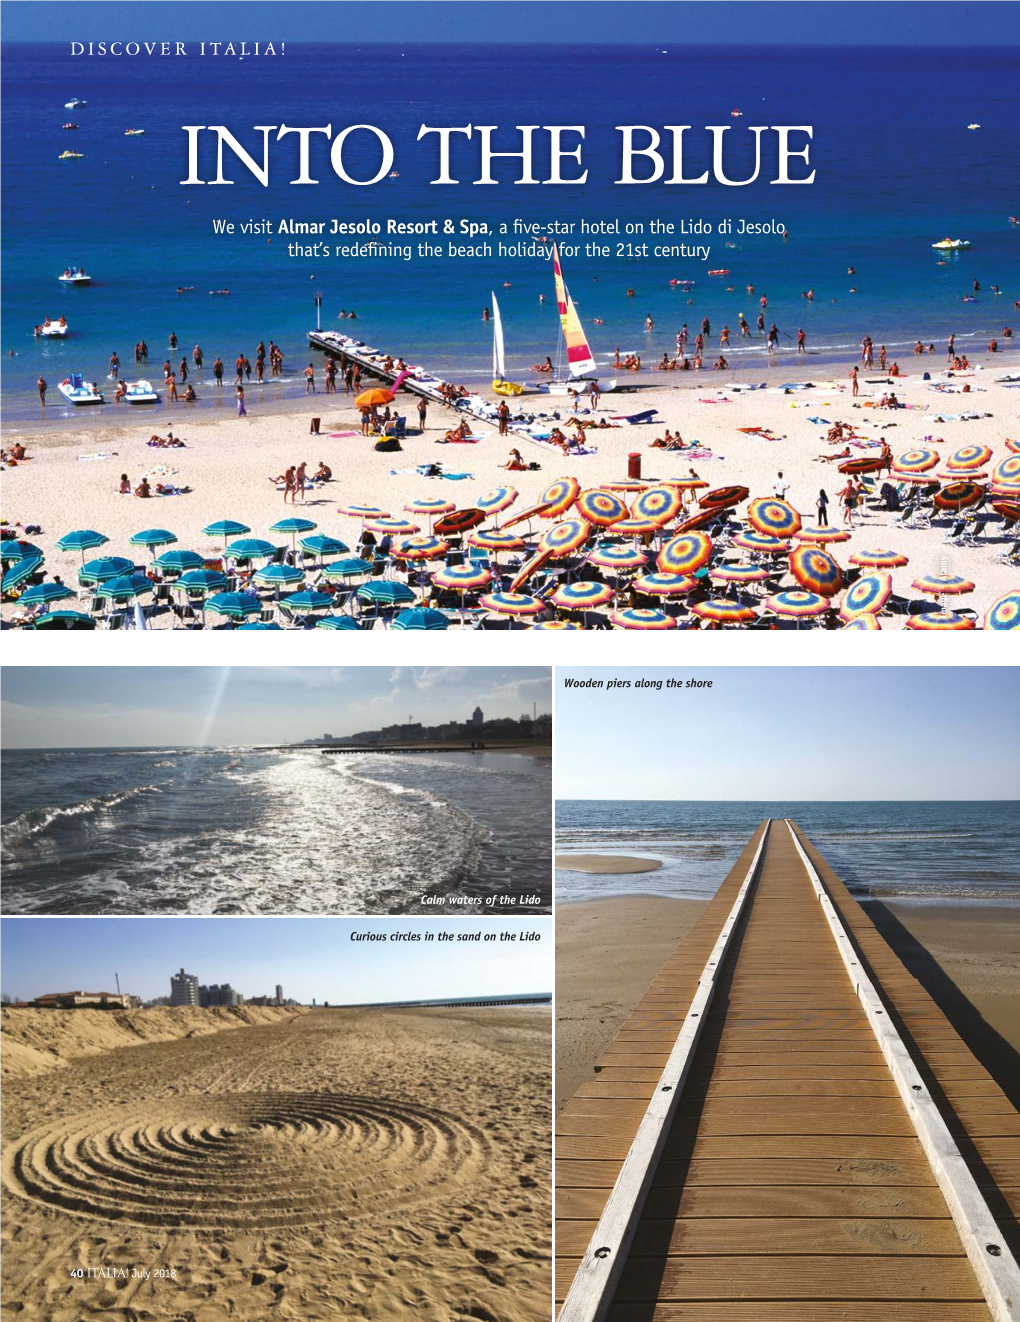 INTO the BLUE We Visit Almar Jesolo Resort & Spa, a ﬁ Ve-Star Hotel on the Lido Di Jesolo That’S Redeﬁ Ning the Beach Holiday for the 21St Century Image © Alamy